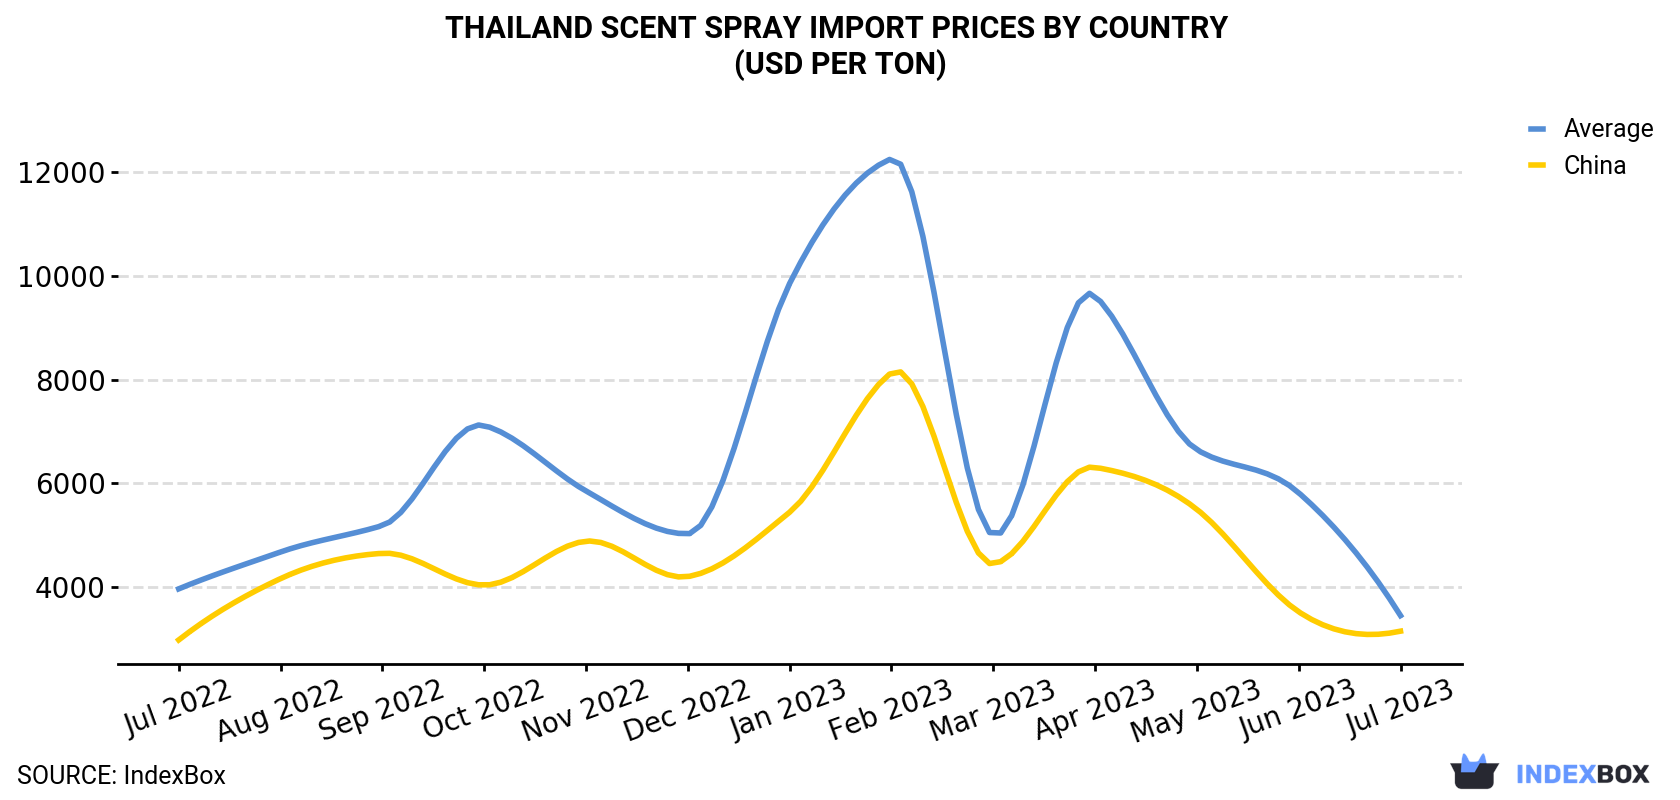 Thailand Scent Spray Import Prices By Country (USD Per Ton)